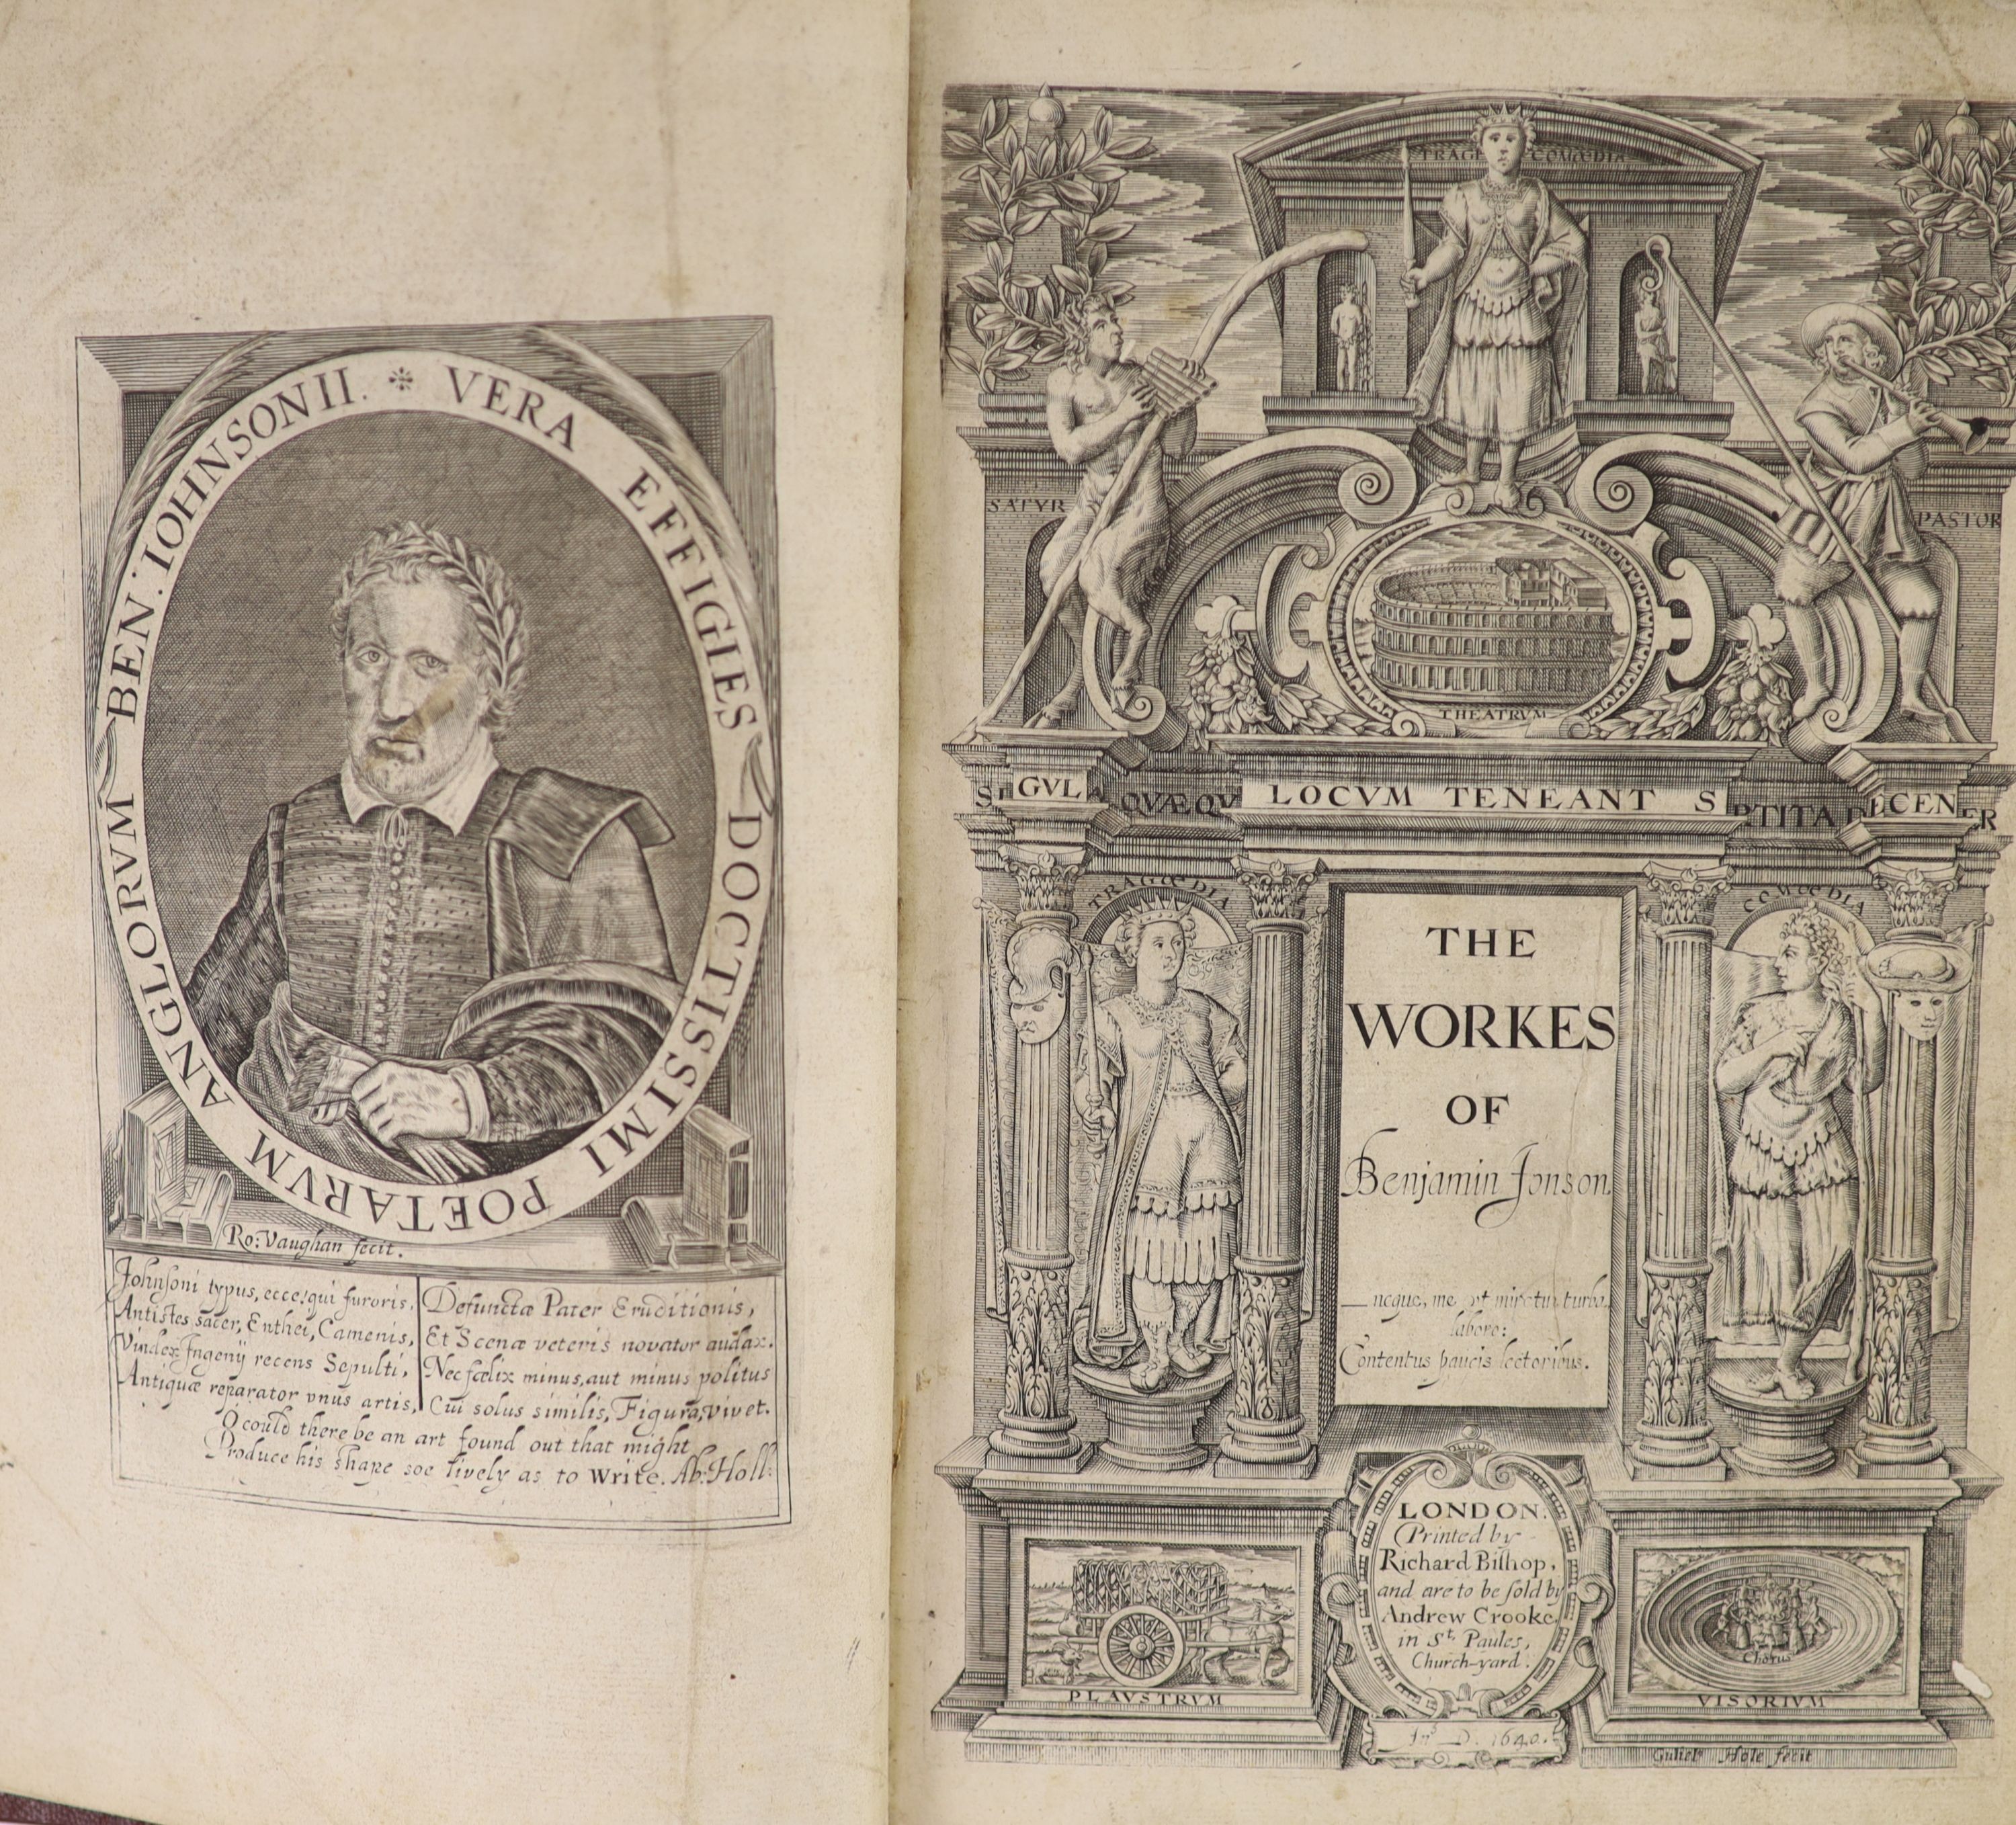 Johnson, Benjamin - The Works of Benjamin Johnson - pictorial engraved 'architectural' title, portrait frontis., engraved head and tailpiece decorations, decorated initial letters, part titles